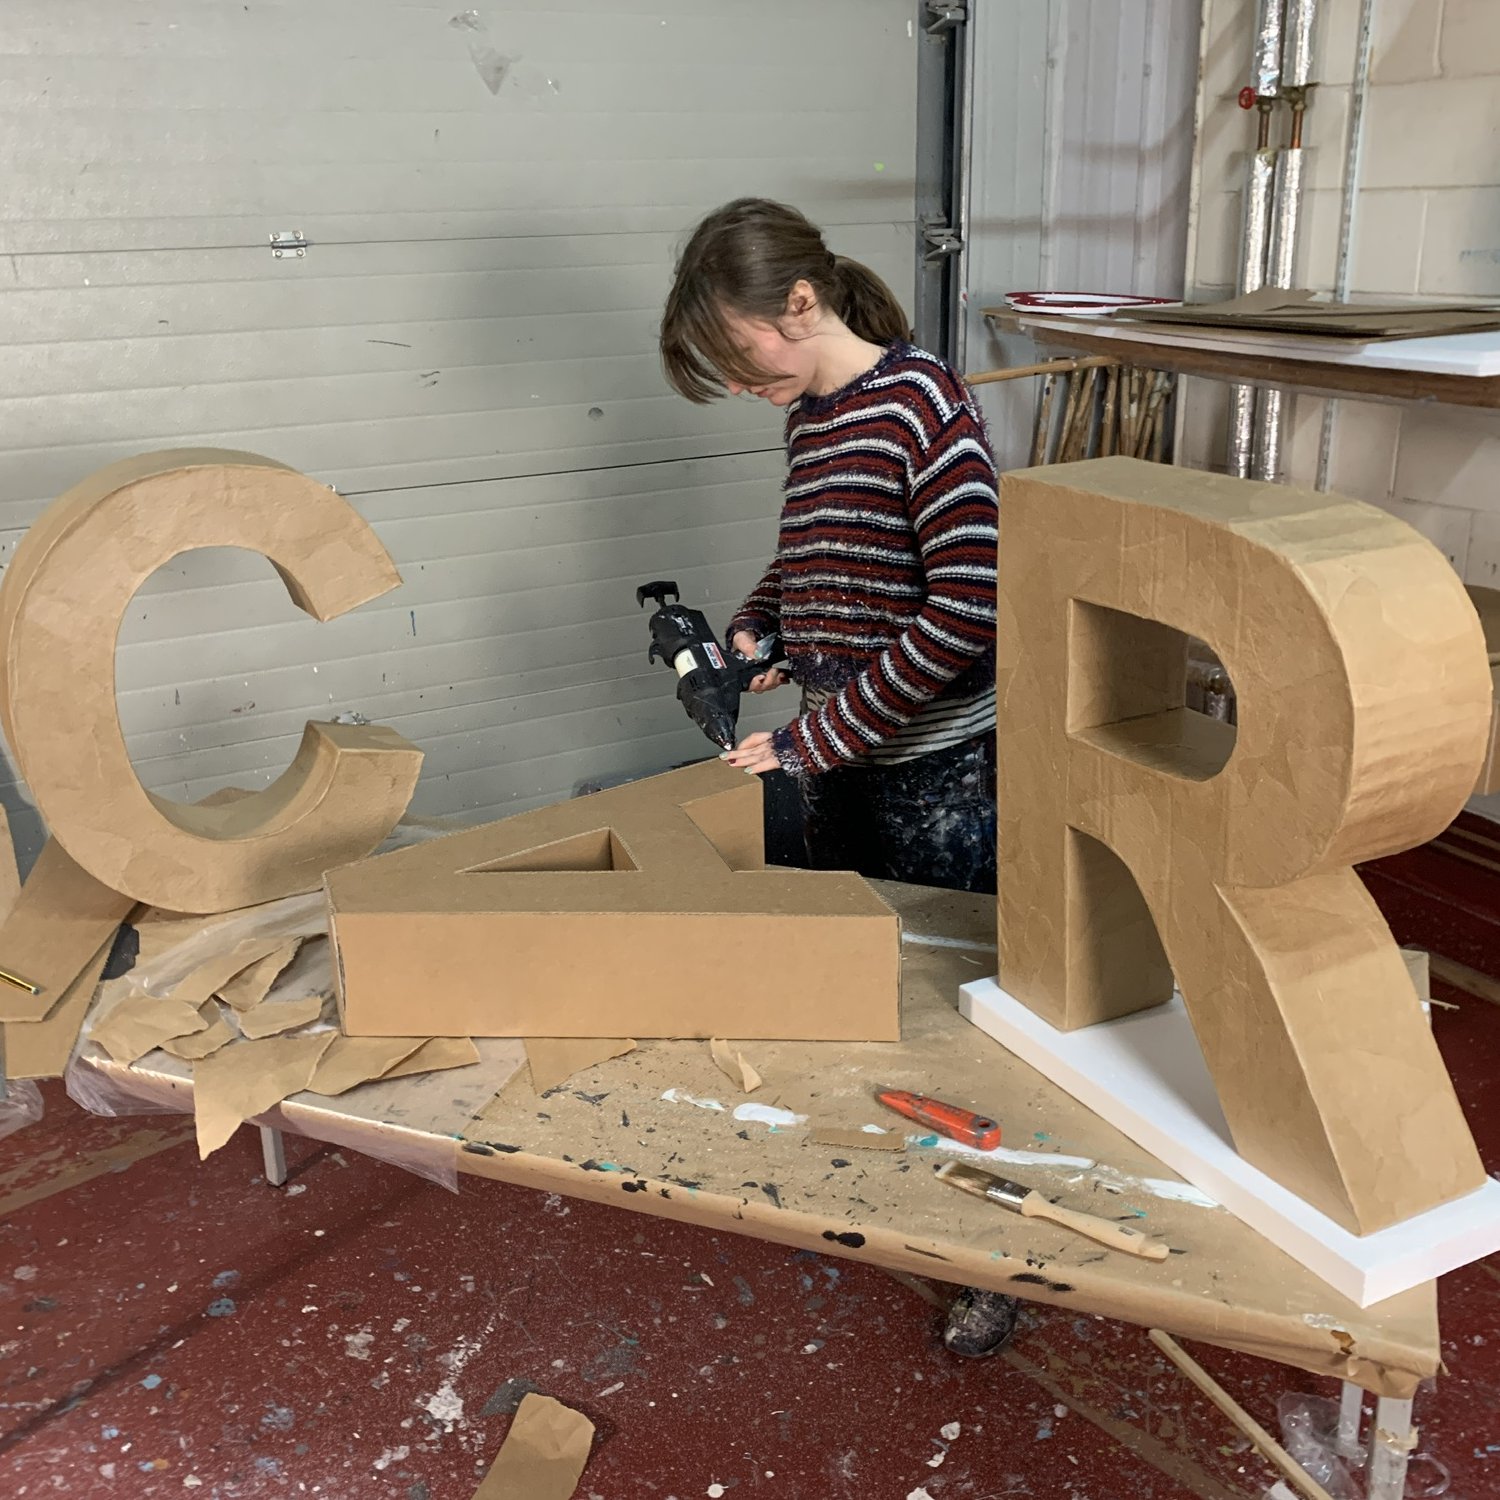 Cut Out Cardboard Letters